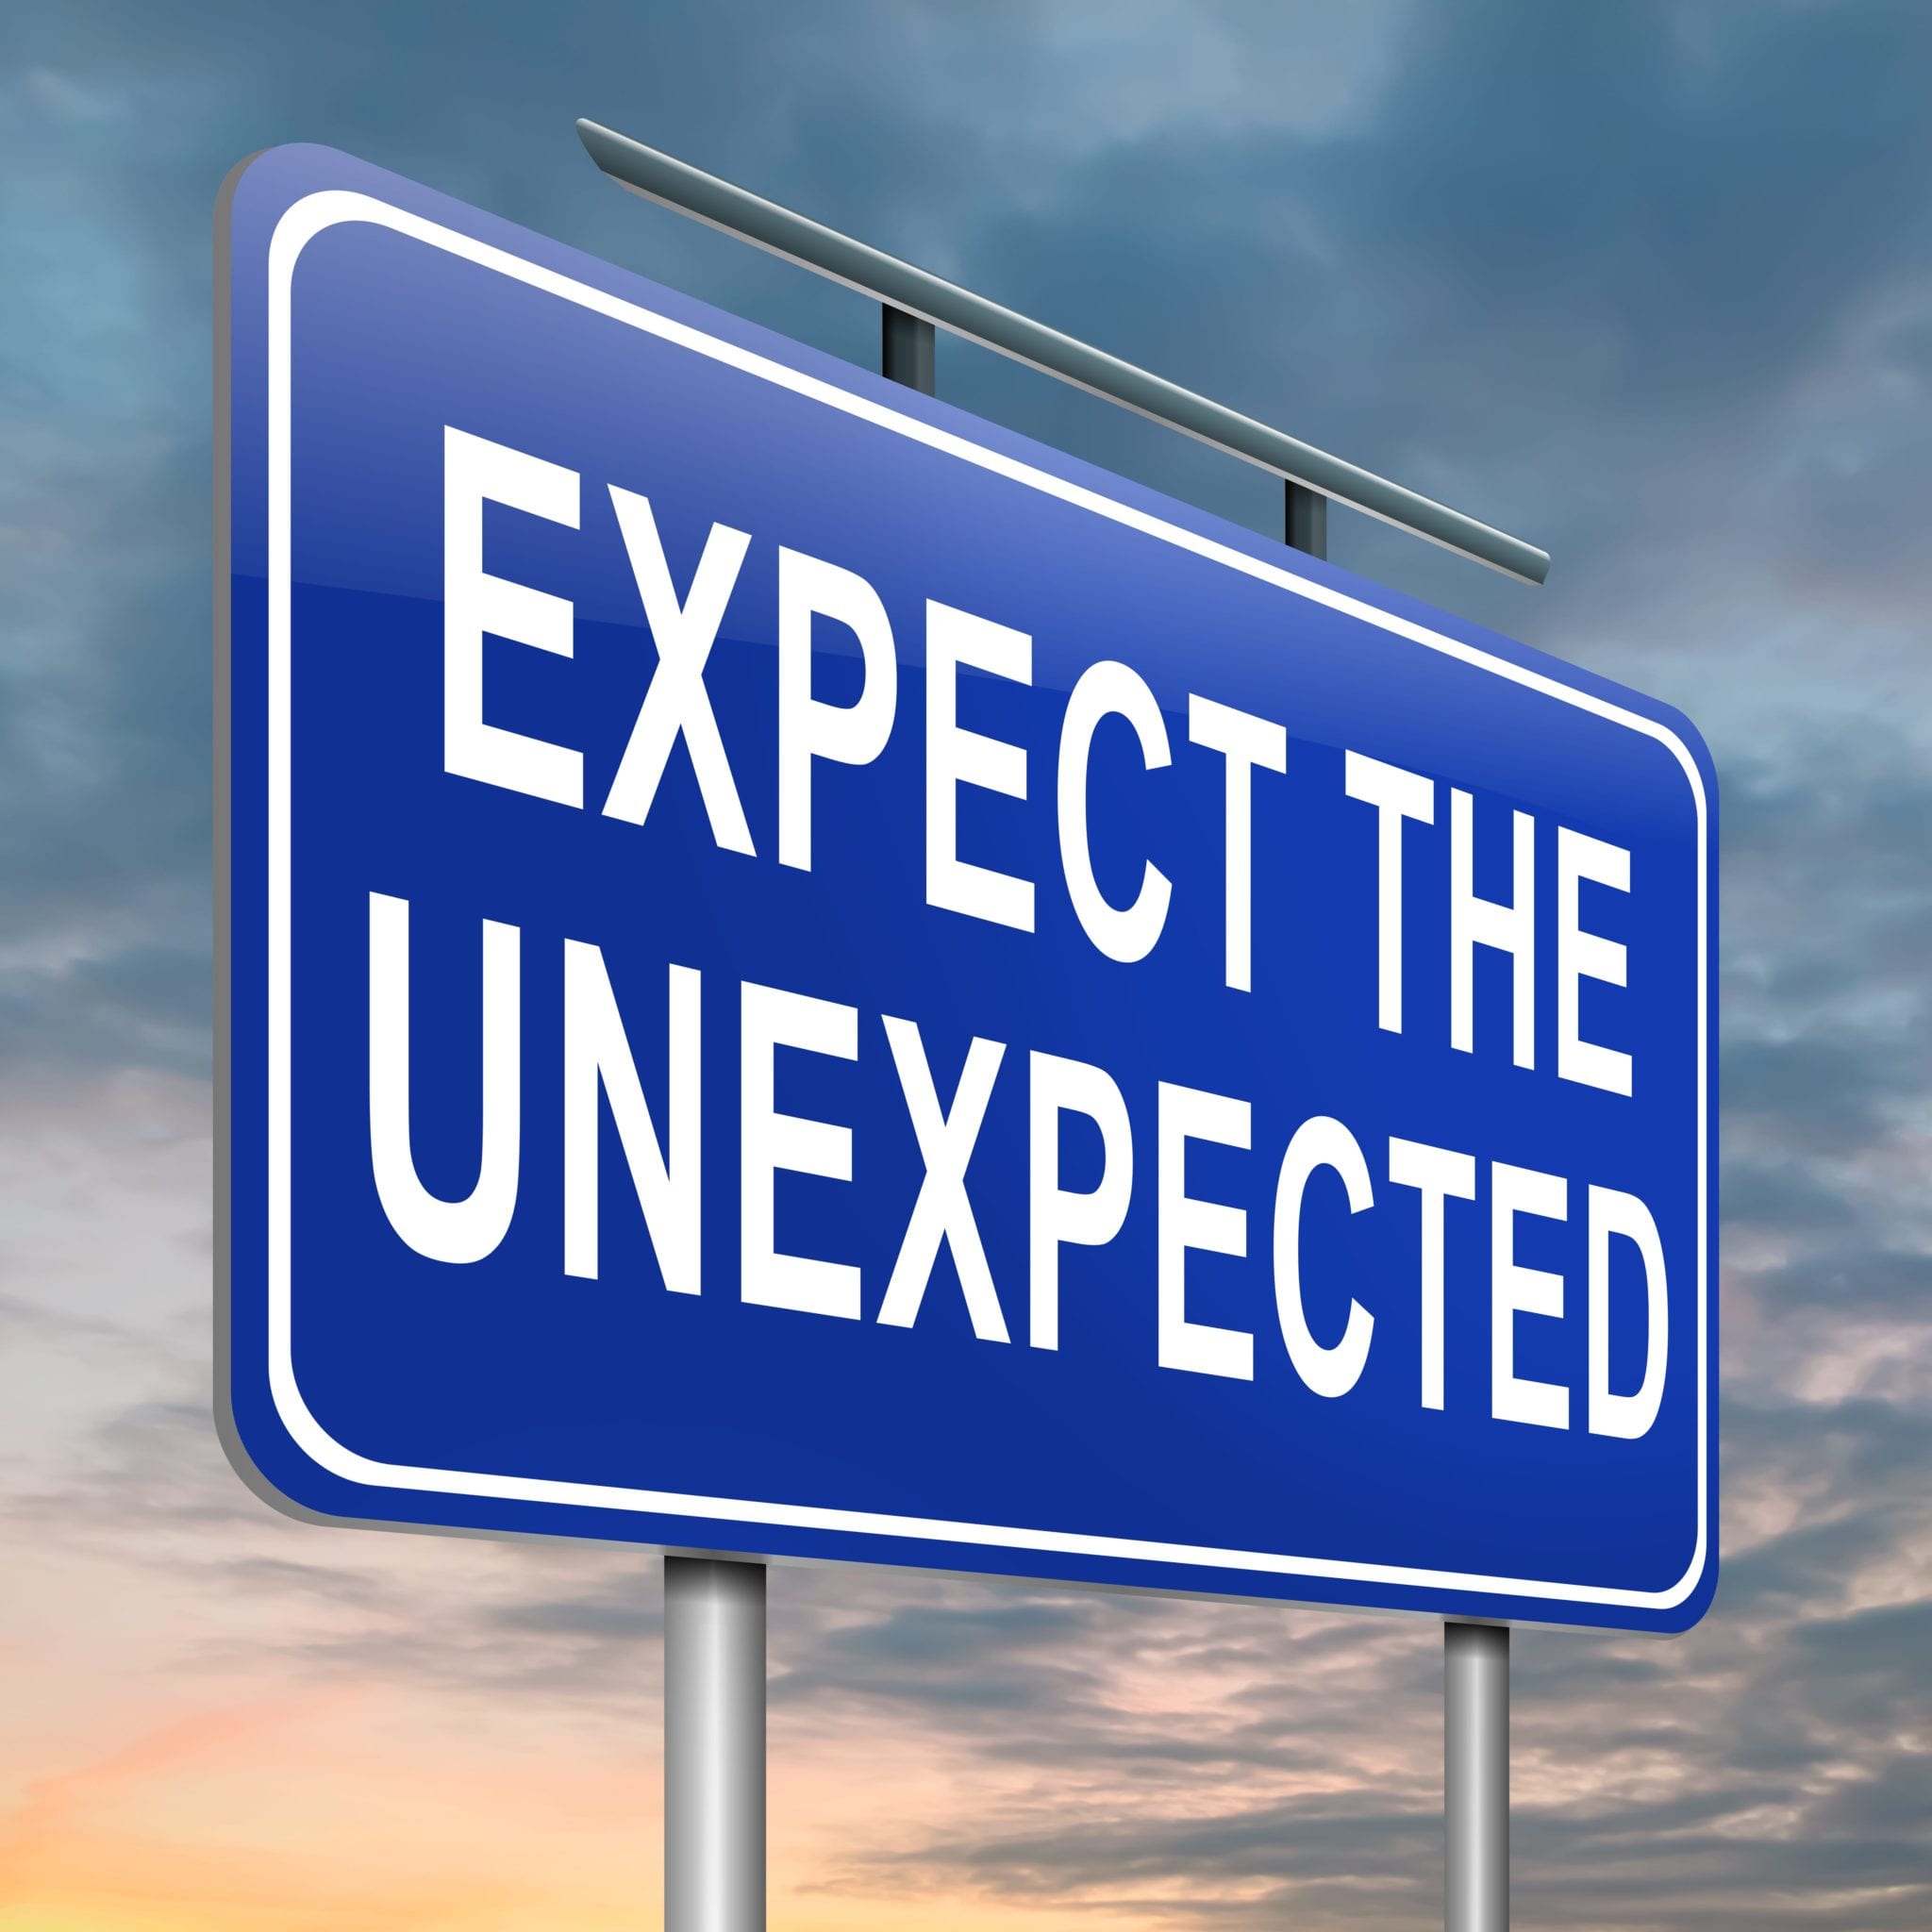 Unexpected event. Unexpected. Expect картинки. Expect the unexpected. Unexpected events.